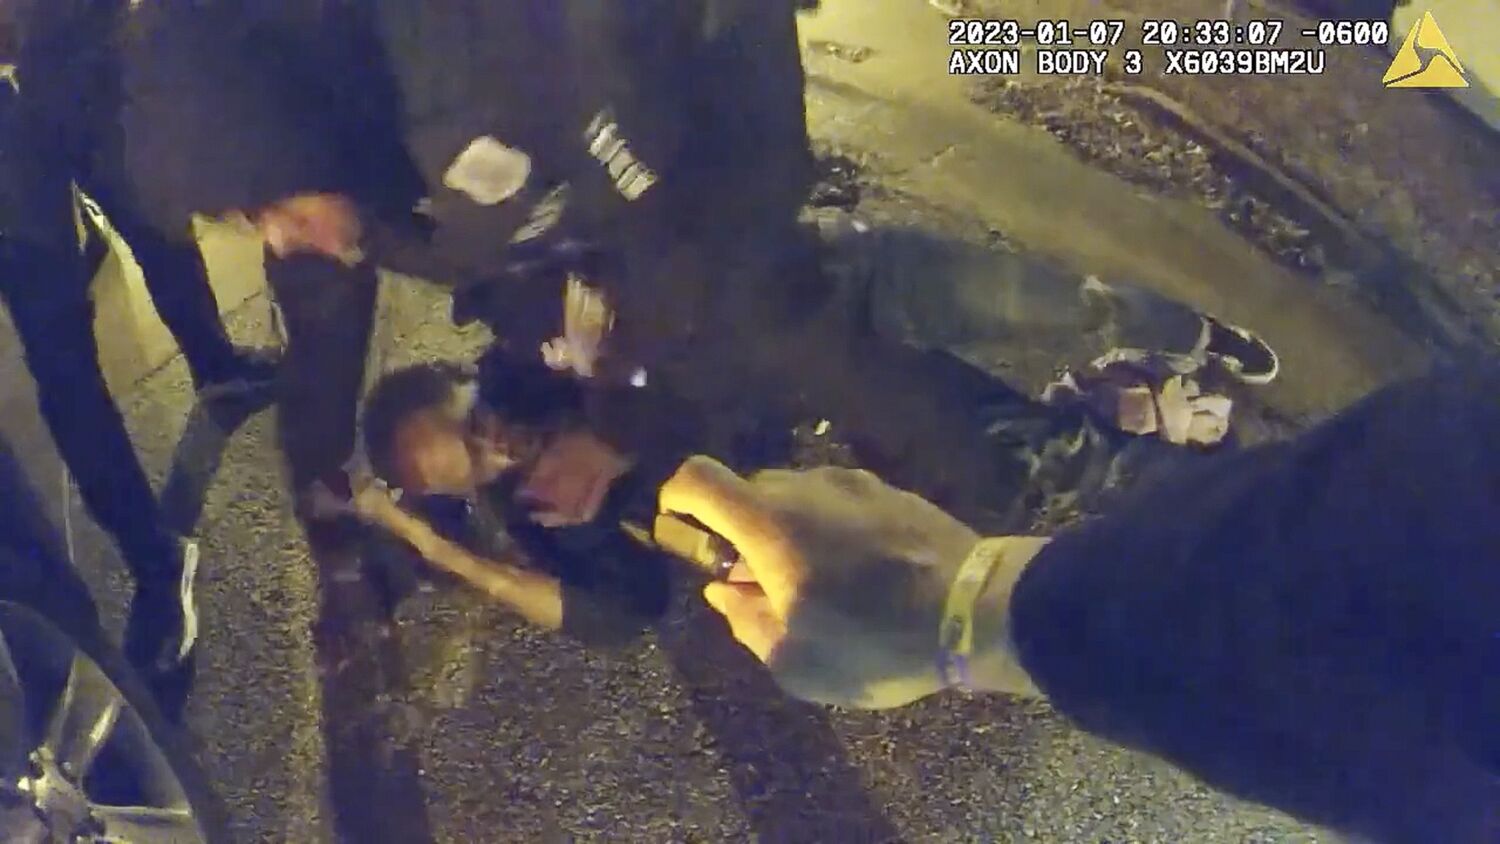 'Far worse than Rodney King': Videos of Tyre Nichols police beating show 'sadistic' rage, experts say